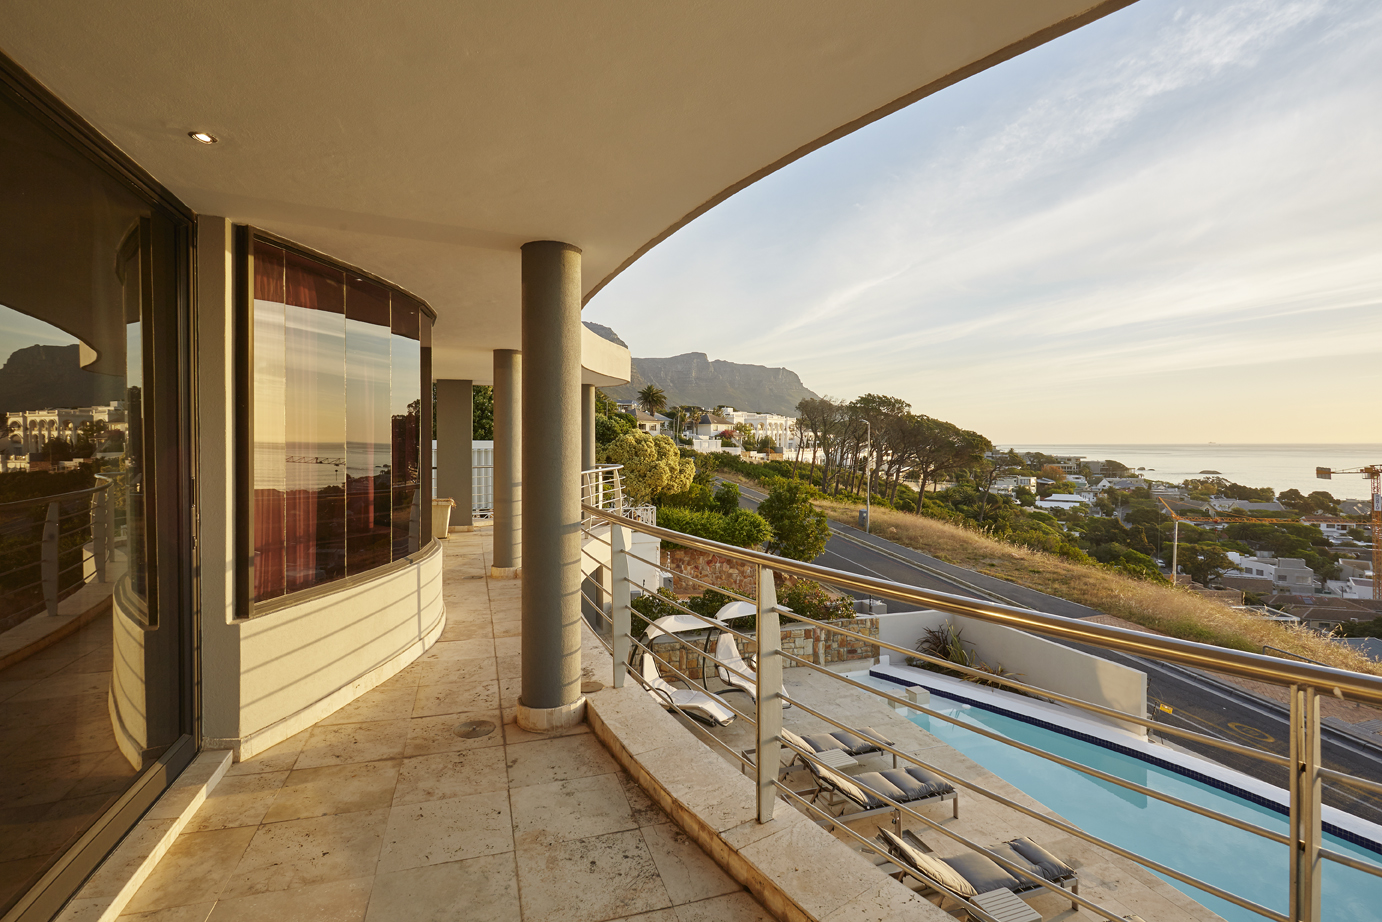 Photo 2 of Villa Waves accommodation in Camps Bay, Cape Town with 4 bedrooms and 4 bathrooms